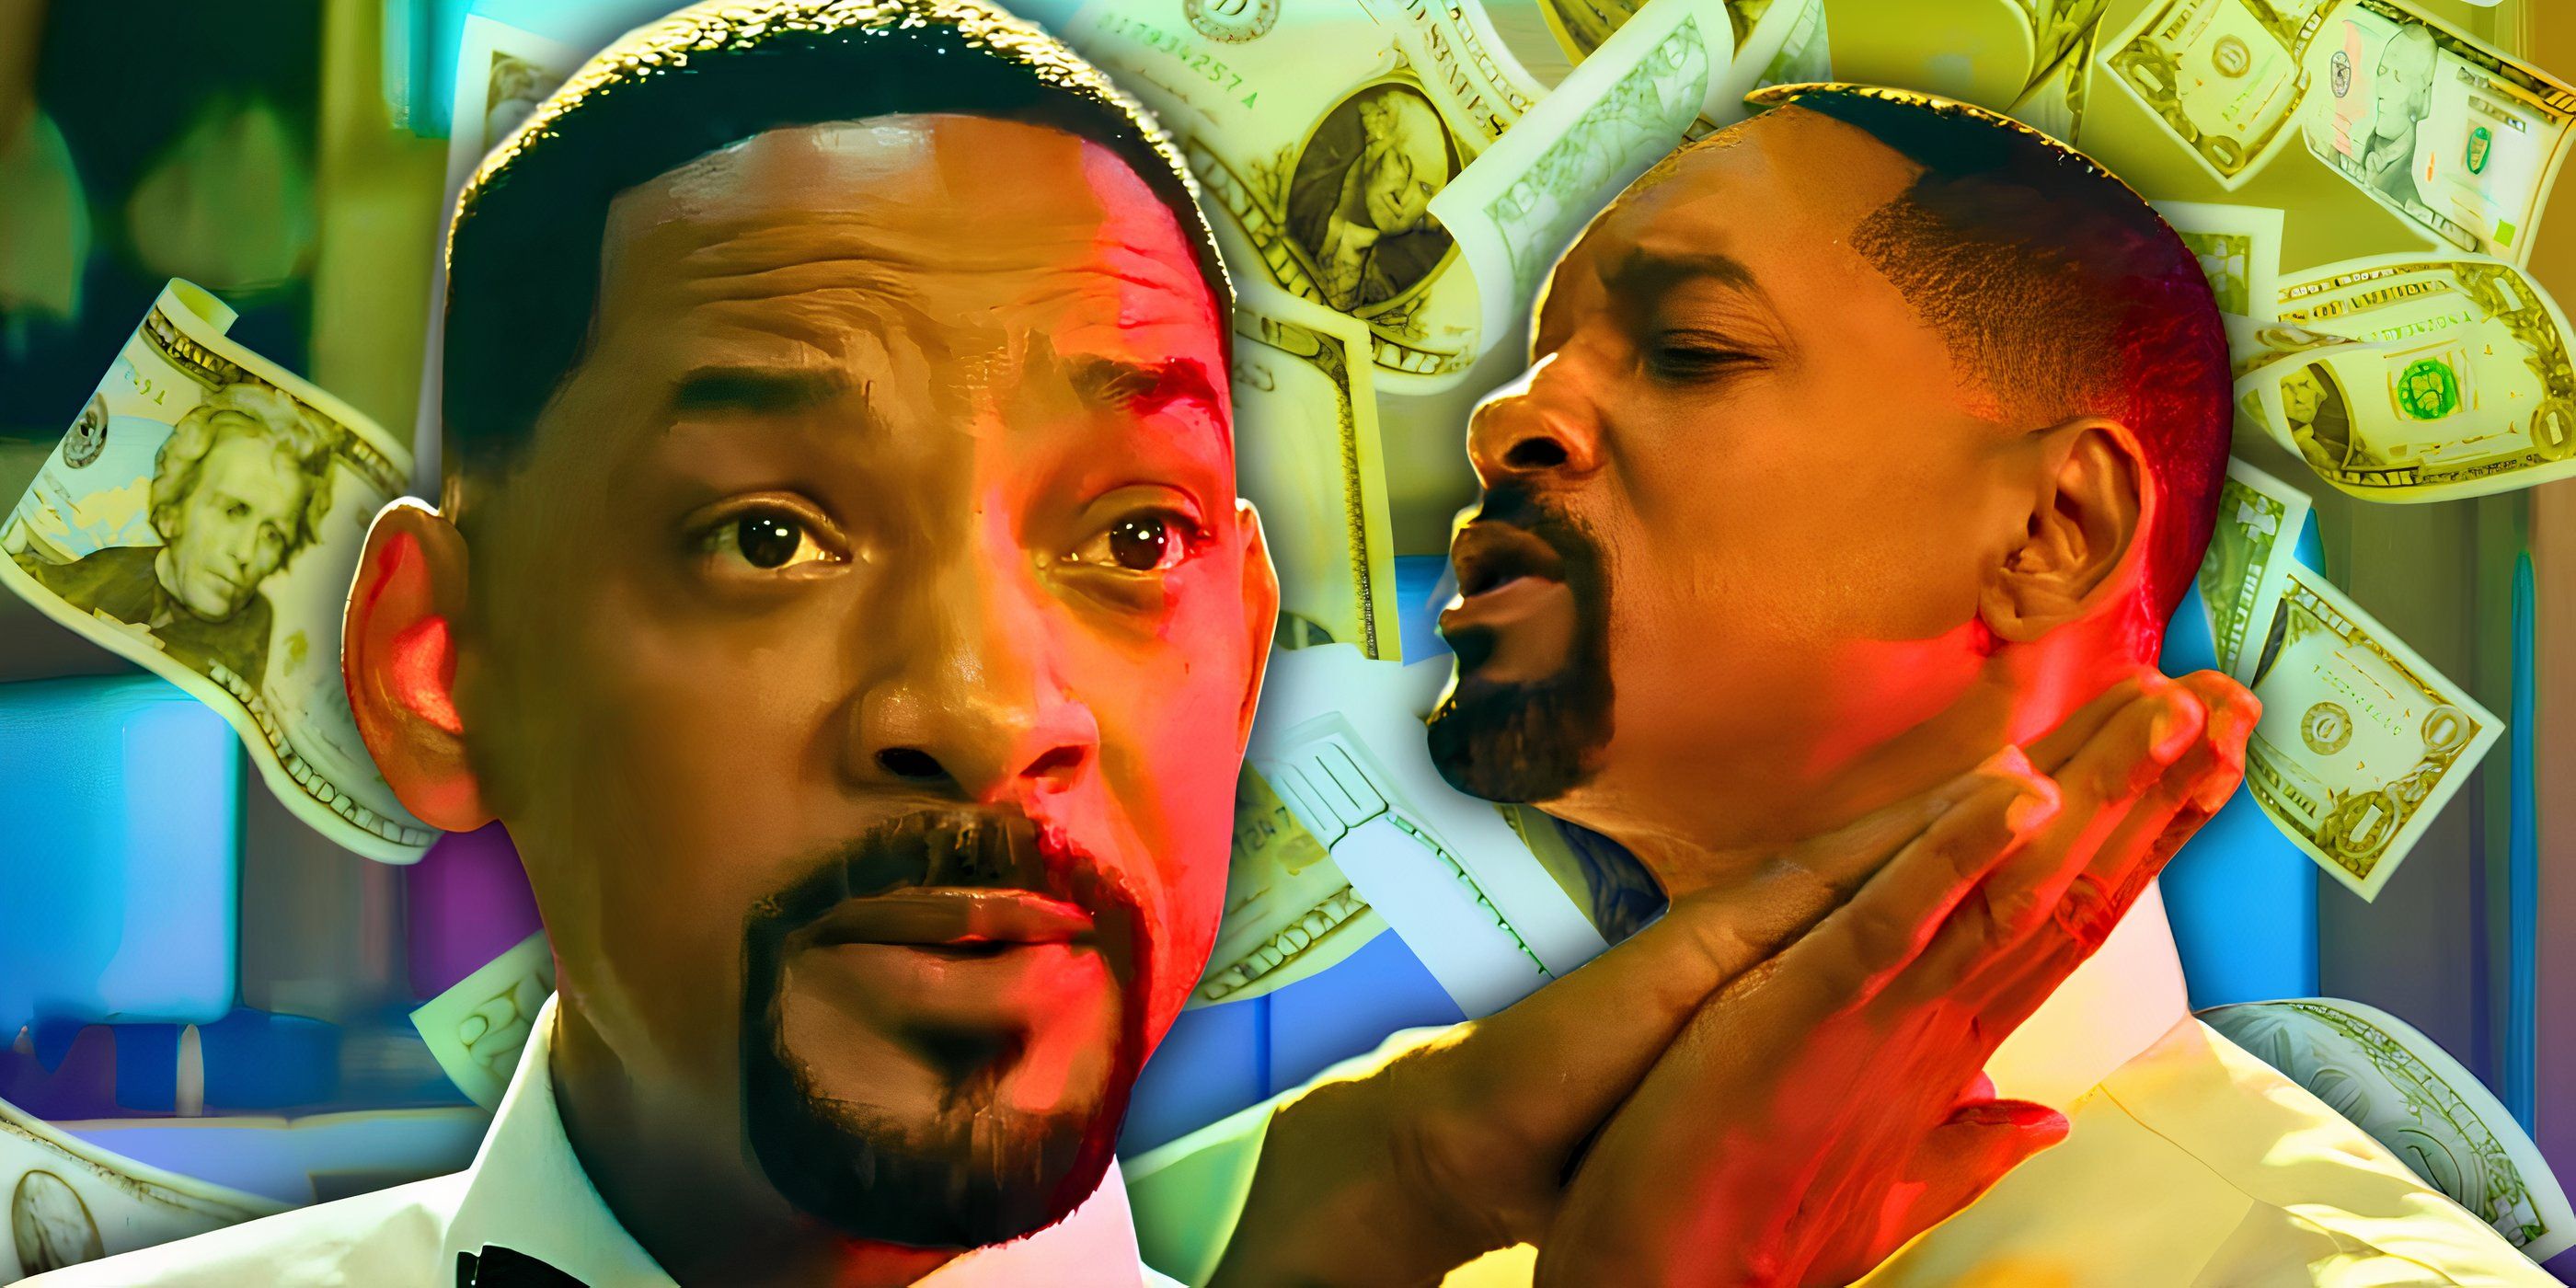 Will Smith in Bad Boys: Ride or Die with money behind him